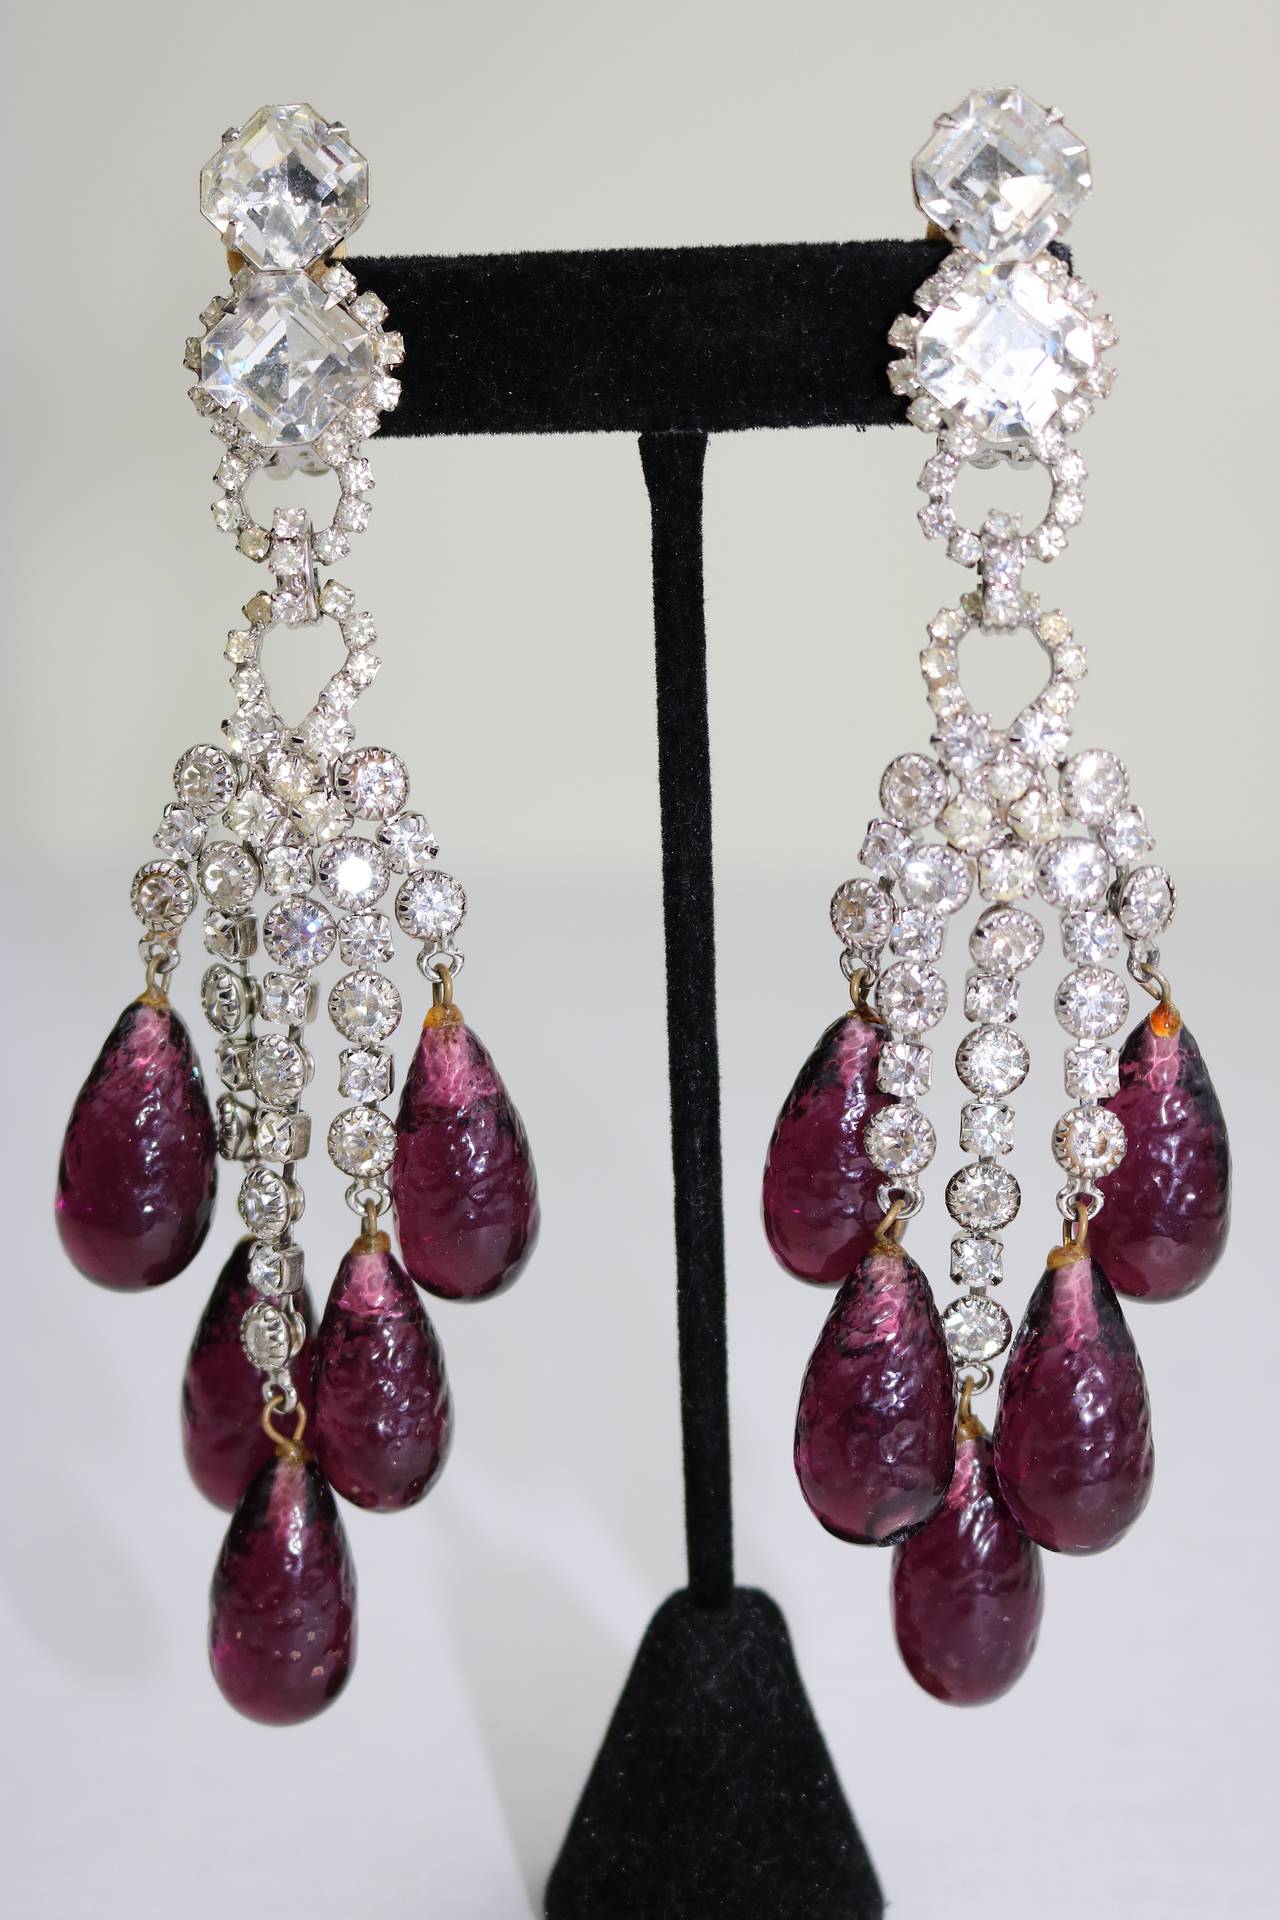 Spectacular runway shoulder-duster one of a kind chandelier drop earrings by Robert Sorrell with Crystal Amethyst Briolettes Drop from faceted sparkly Faux Diamonds in a silver-tone setting. In very good condition, these clip earrings measure 5